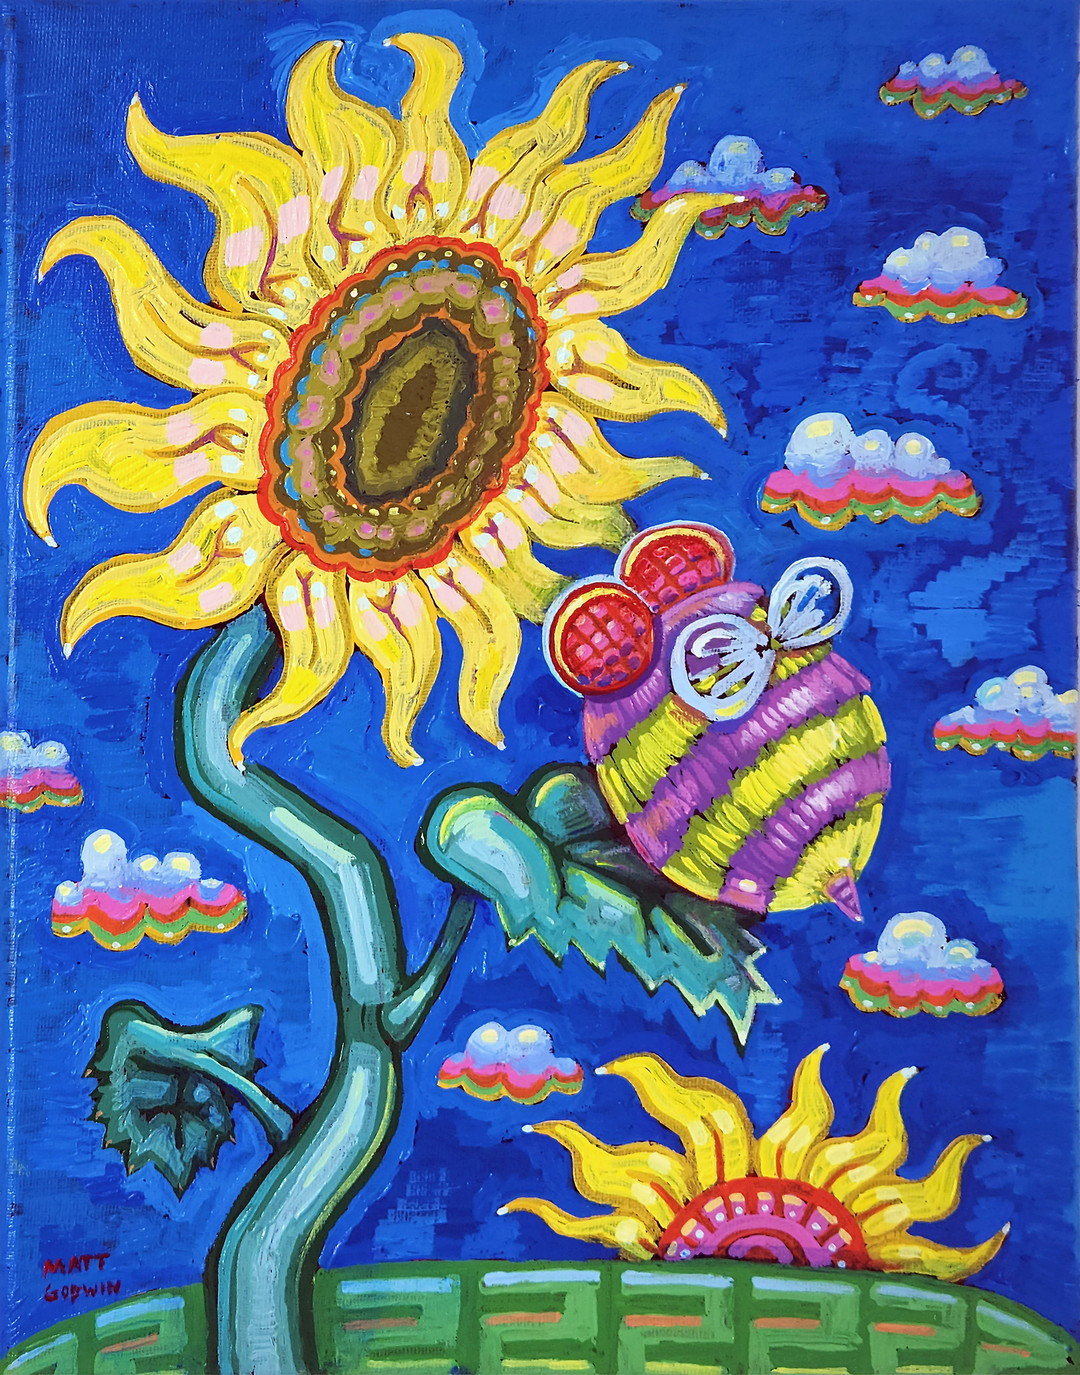 'Bee Visits Sunflower' by Matt Godwin, UV Varnished Acrylic on Stretched Canvas, 11"x14" (5/8" deep)
